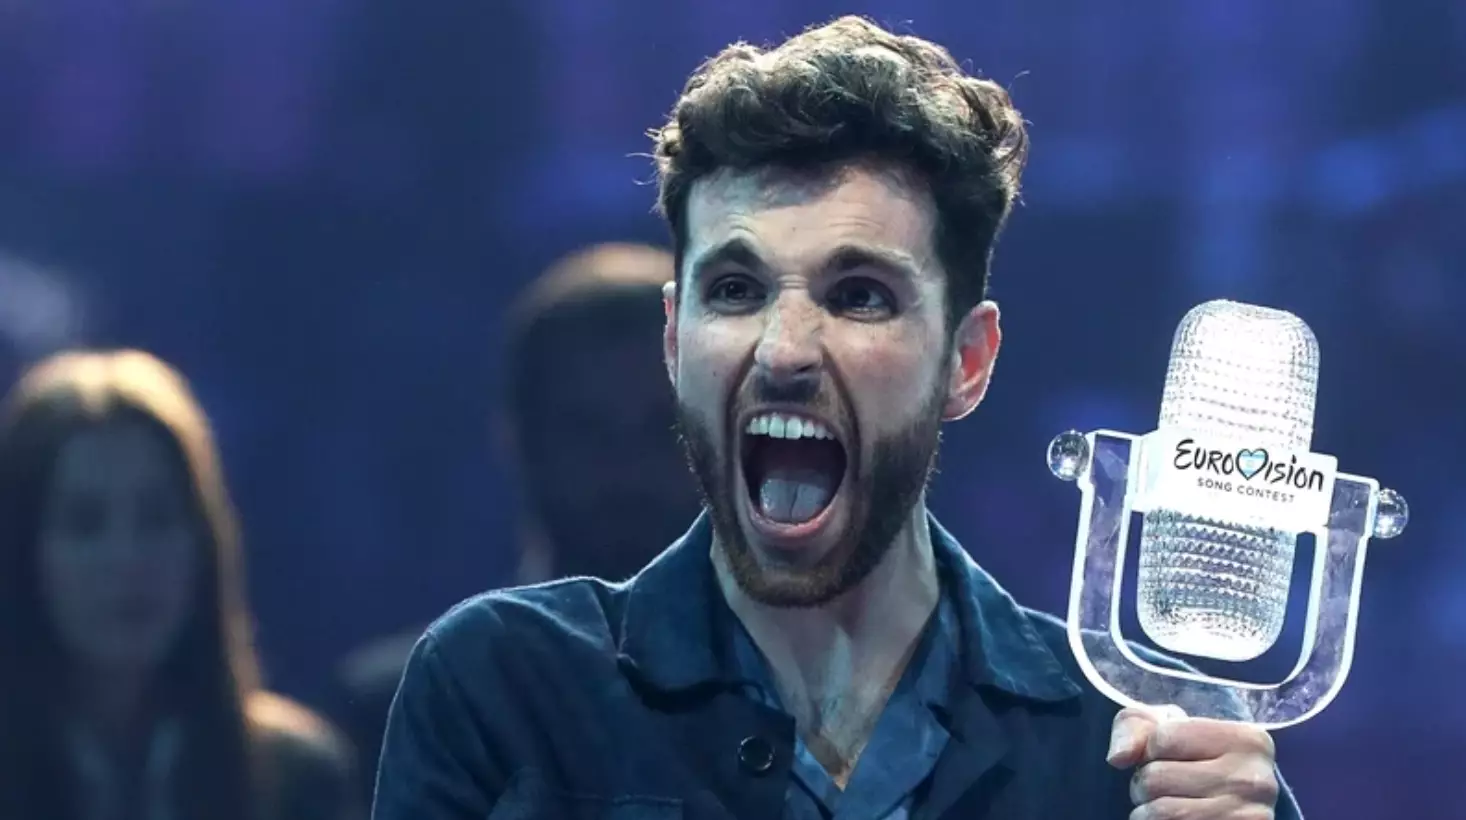 Eurovision Reigning Champion Duncan Laurence Tests Positive For Covid After First Semi-Final Performance